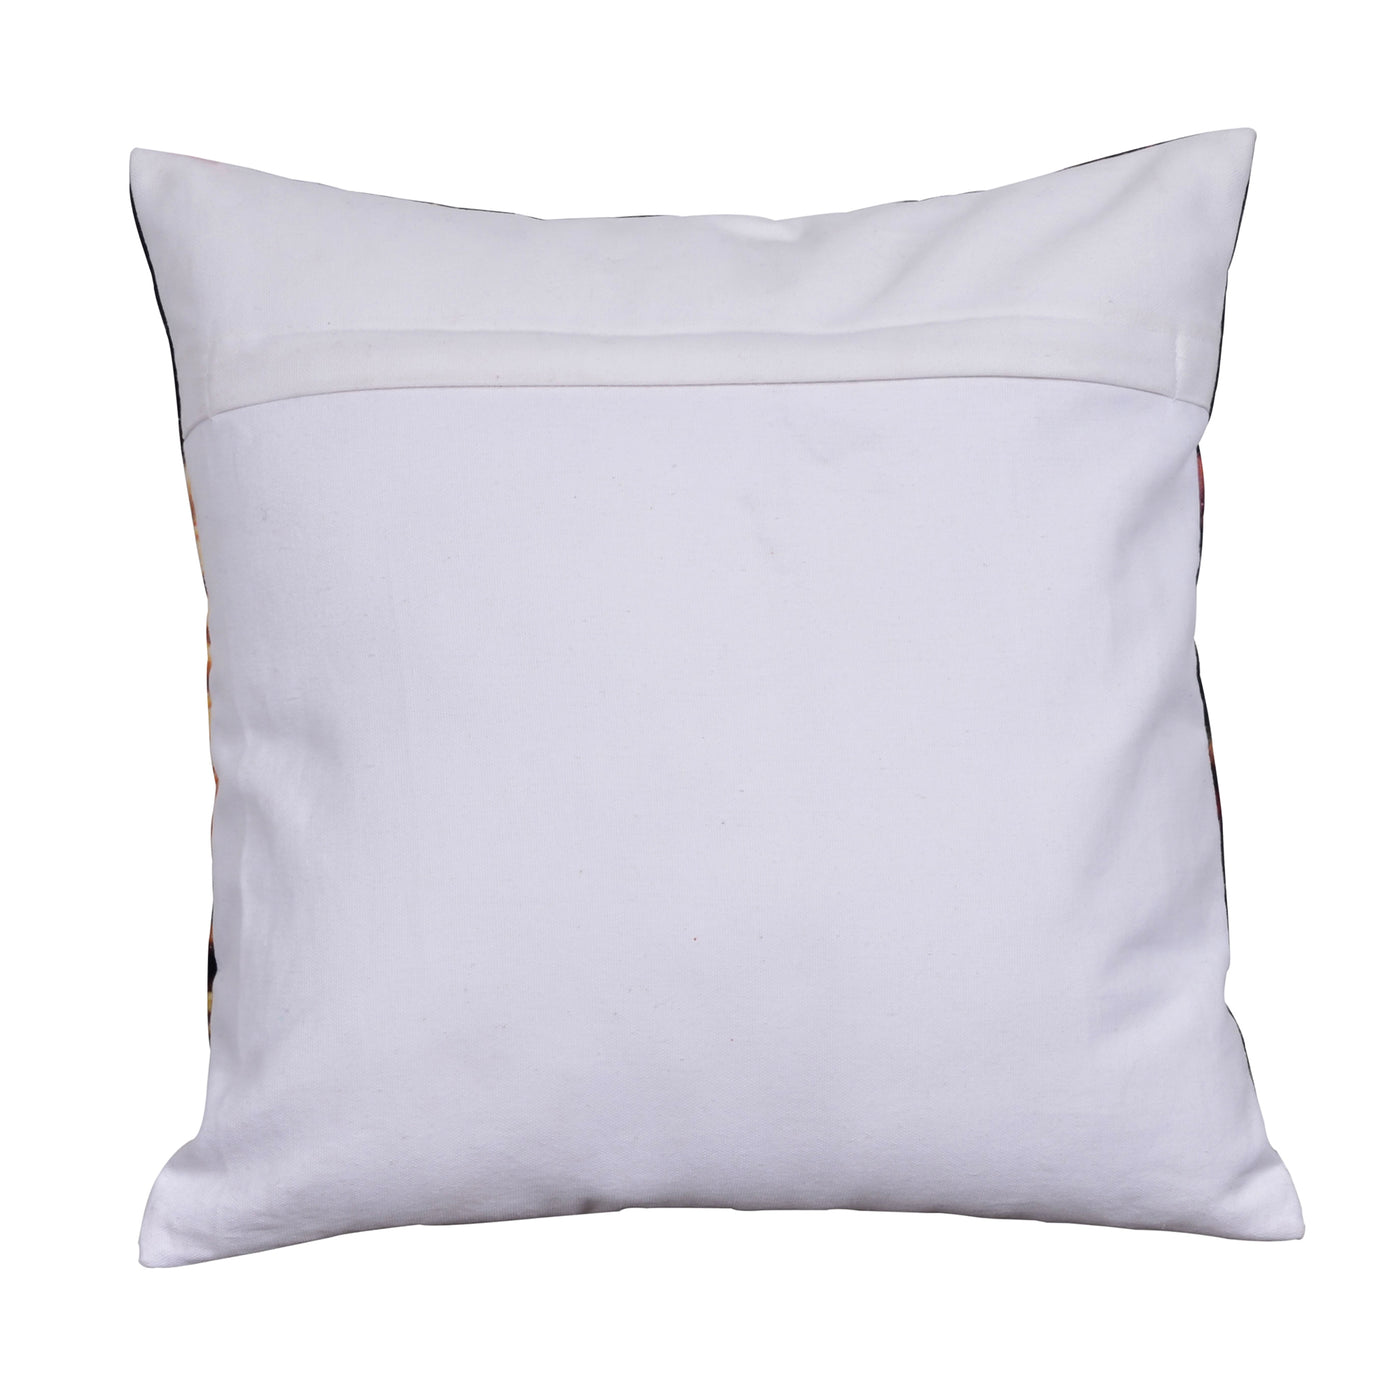 Be Lovely Cotton Cushion Cover 16